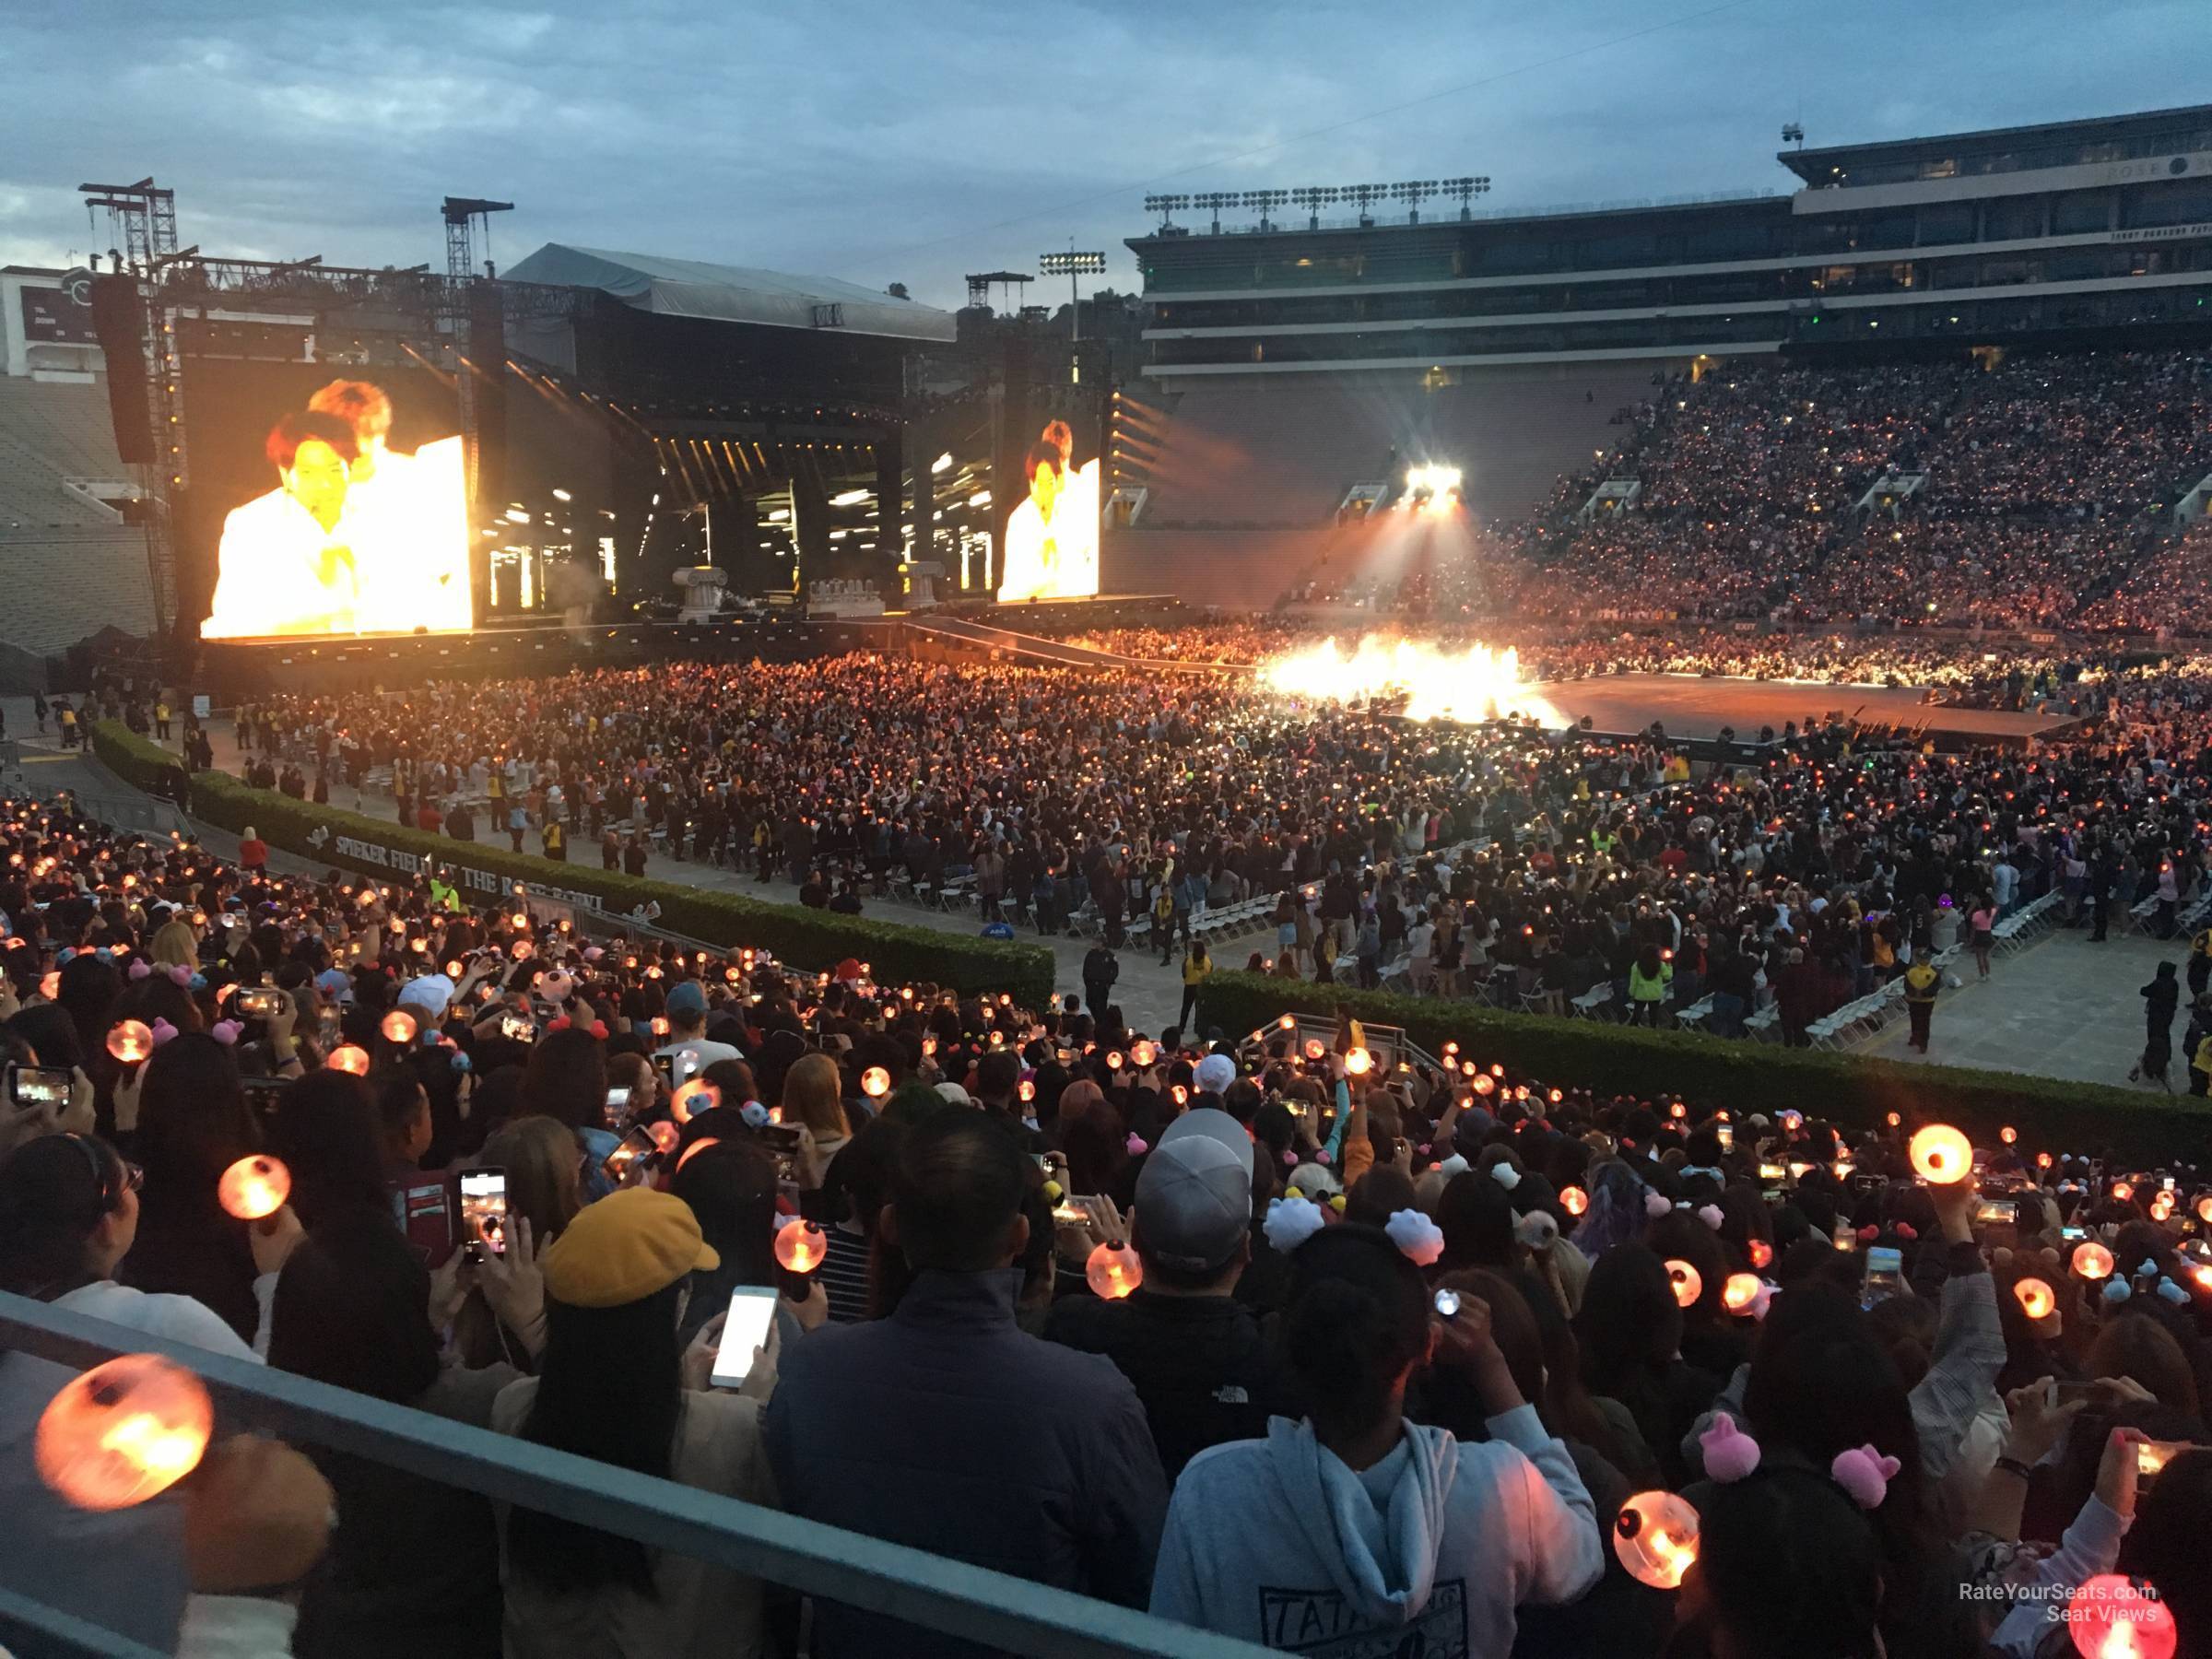 Section 7 at Rose Bowl Stadium for Concerts - RateYourSeats.com